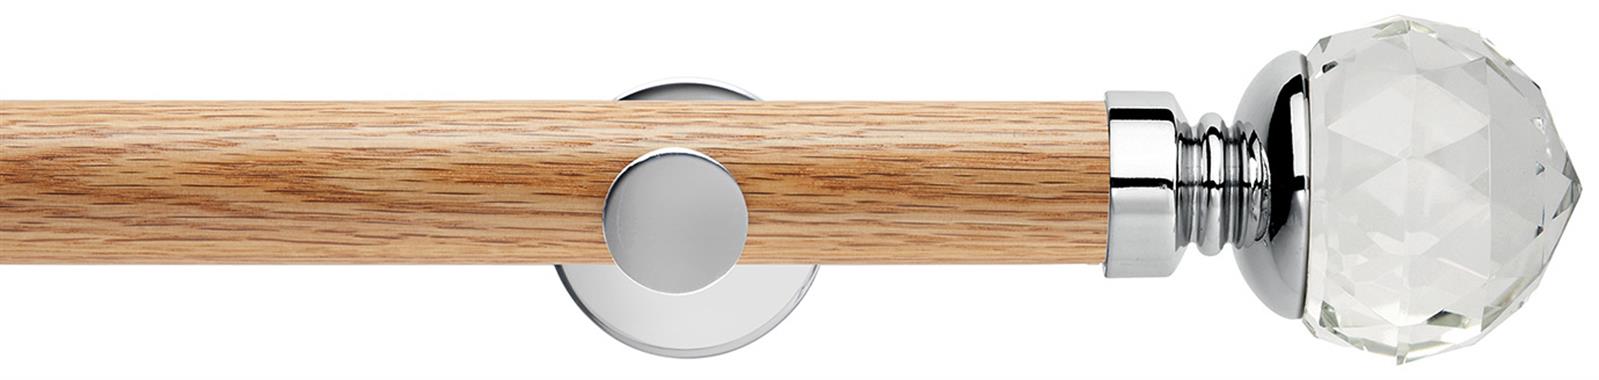 Neo 35mm Oak Wood Eyelet Pole, Chrome, Clear Faceted Ball